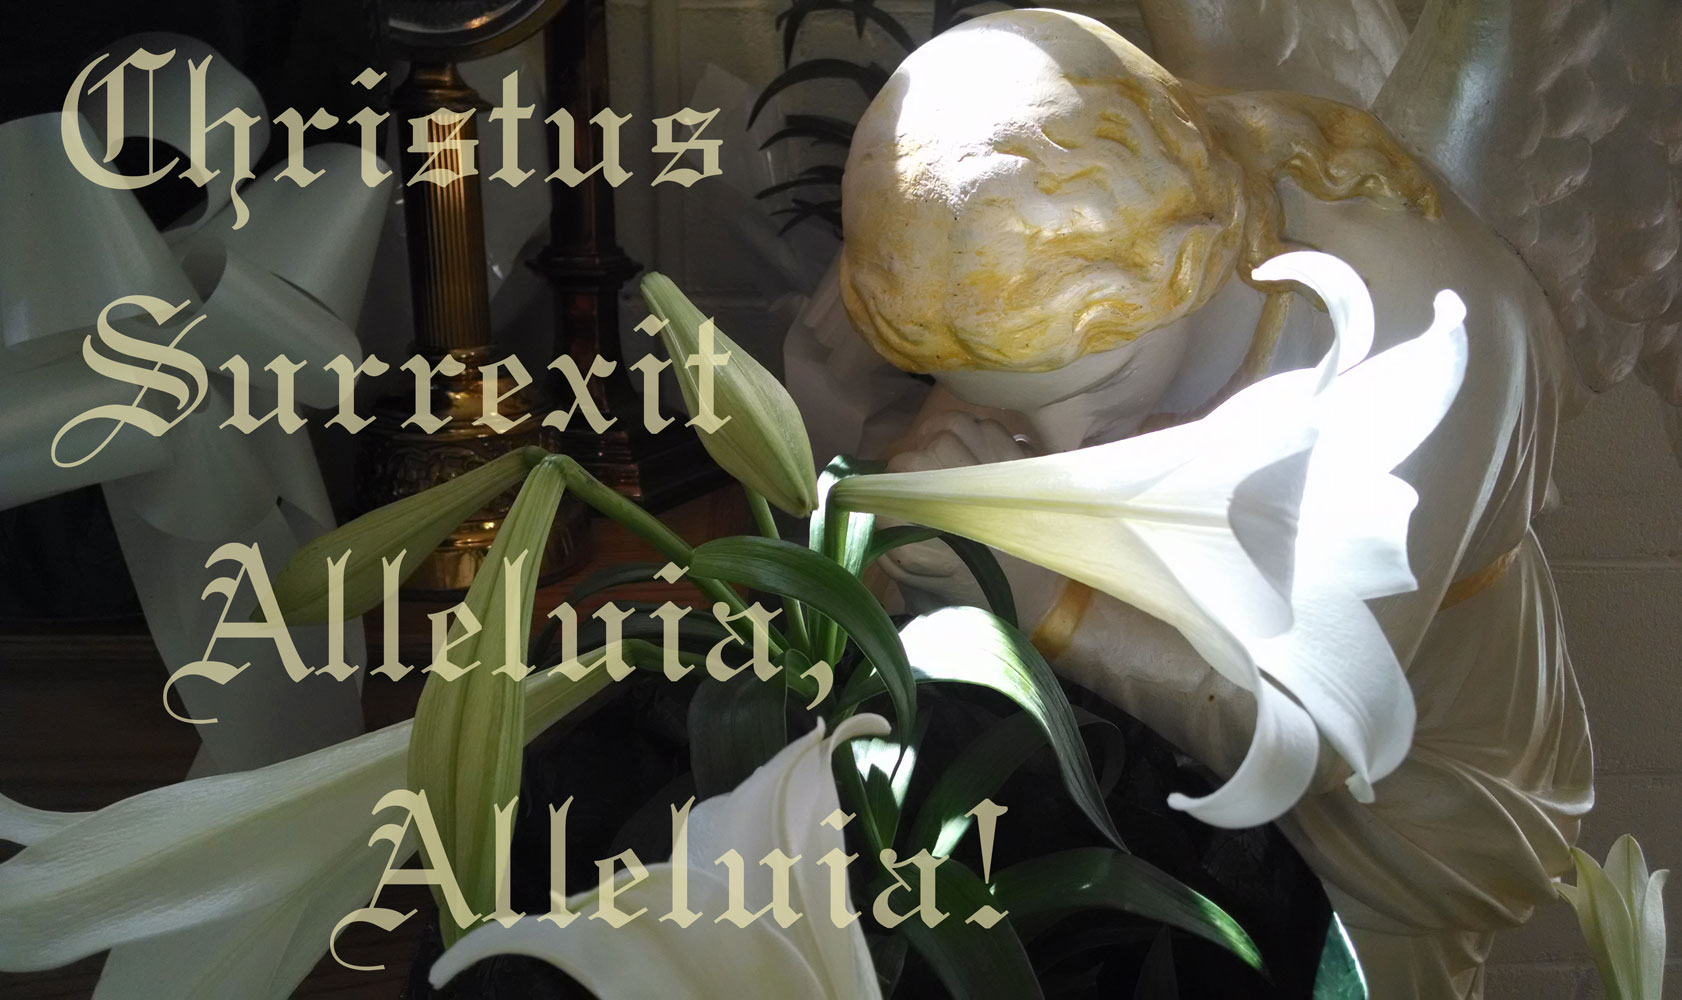 Photo of angel statue with Easter lilies in sunlight, with text: Christus Surrexit, Alleluia, Alleluia!